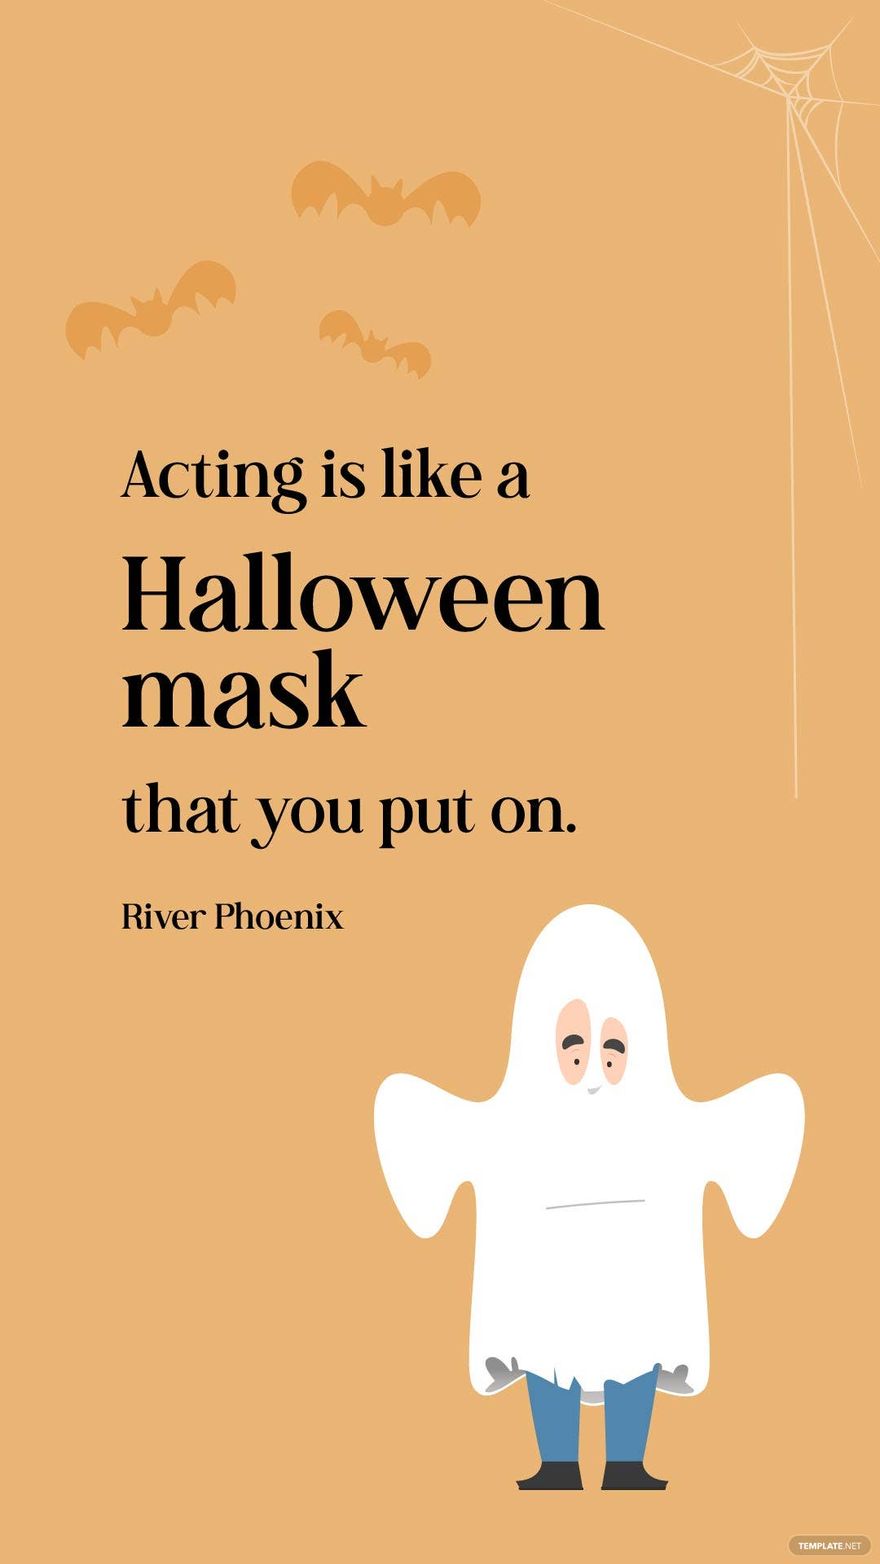 River Phoenix-Acting is like a Halloween mask that you put on. in JPG